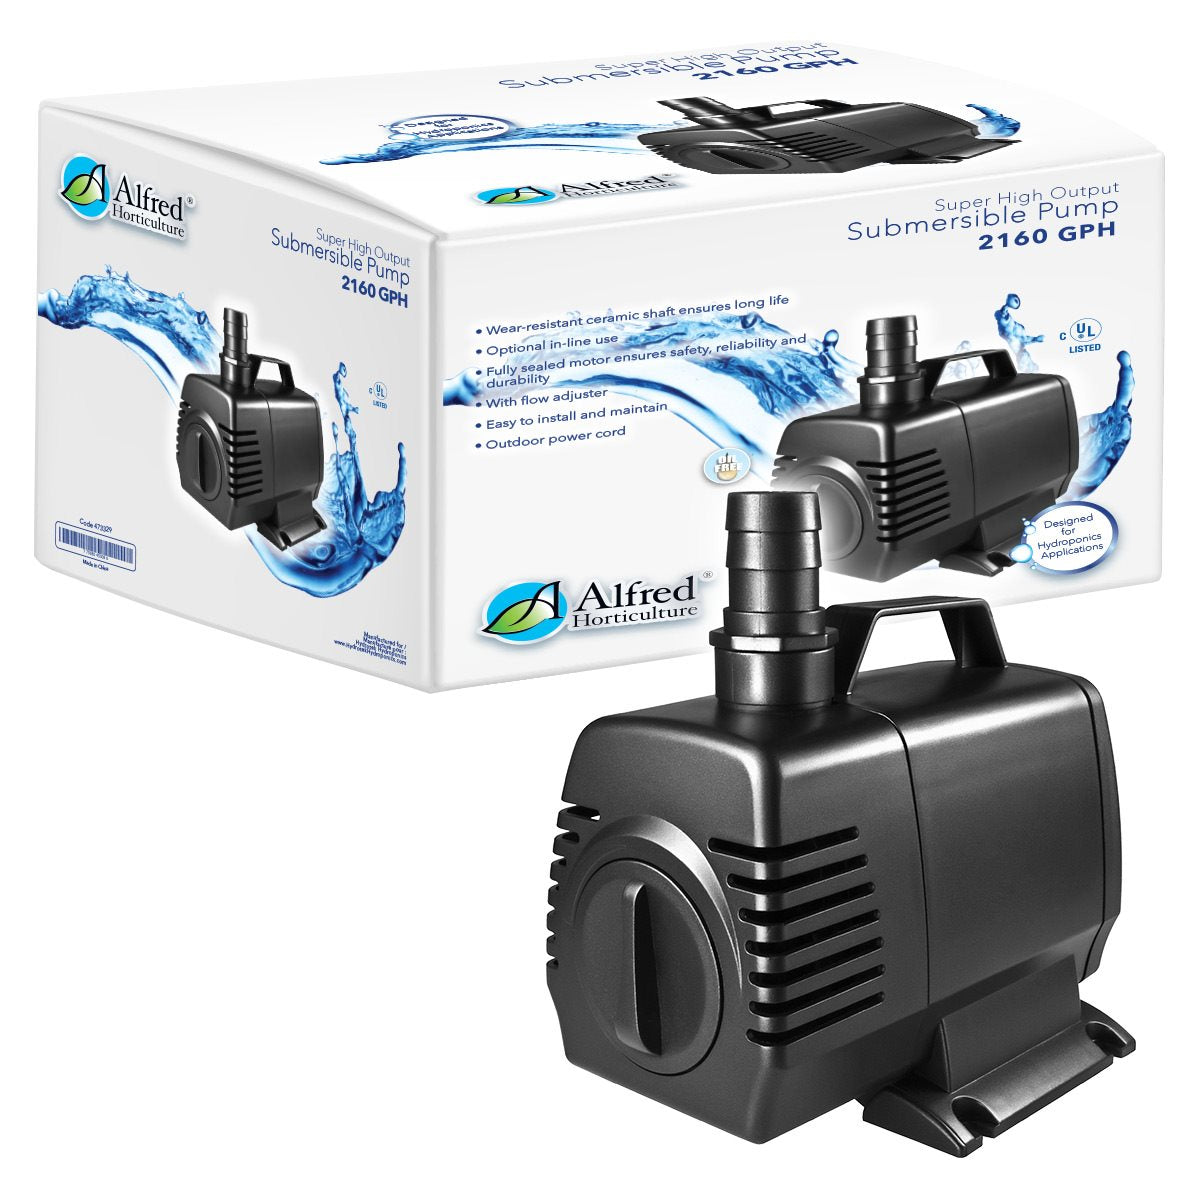 Product Image:Alfred Water Pump 2160GPH